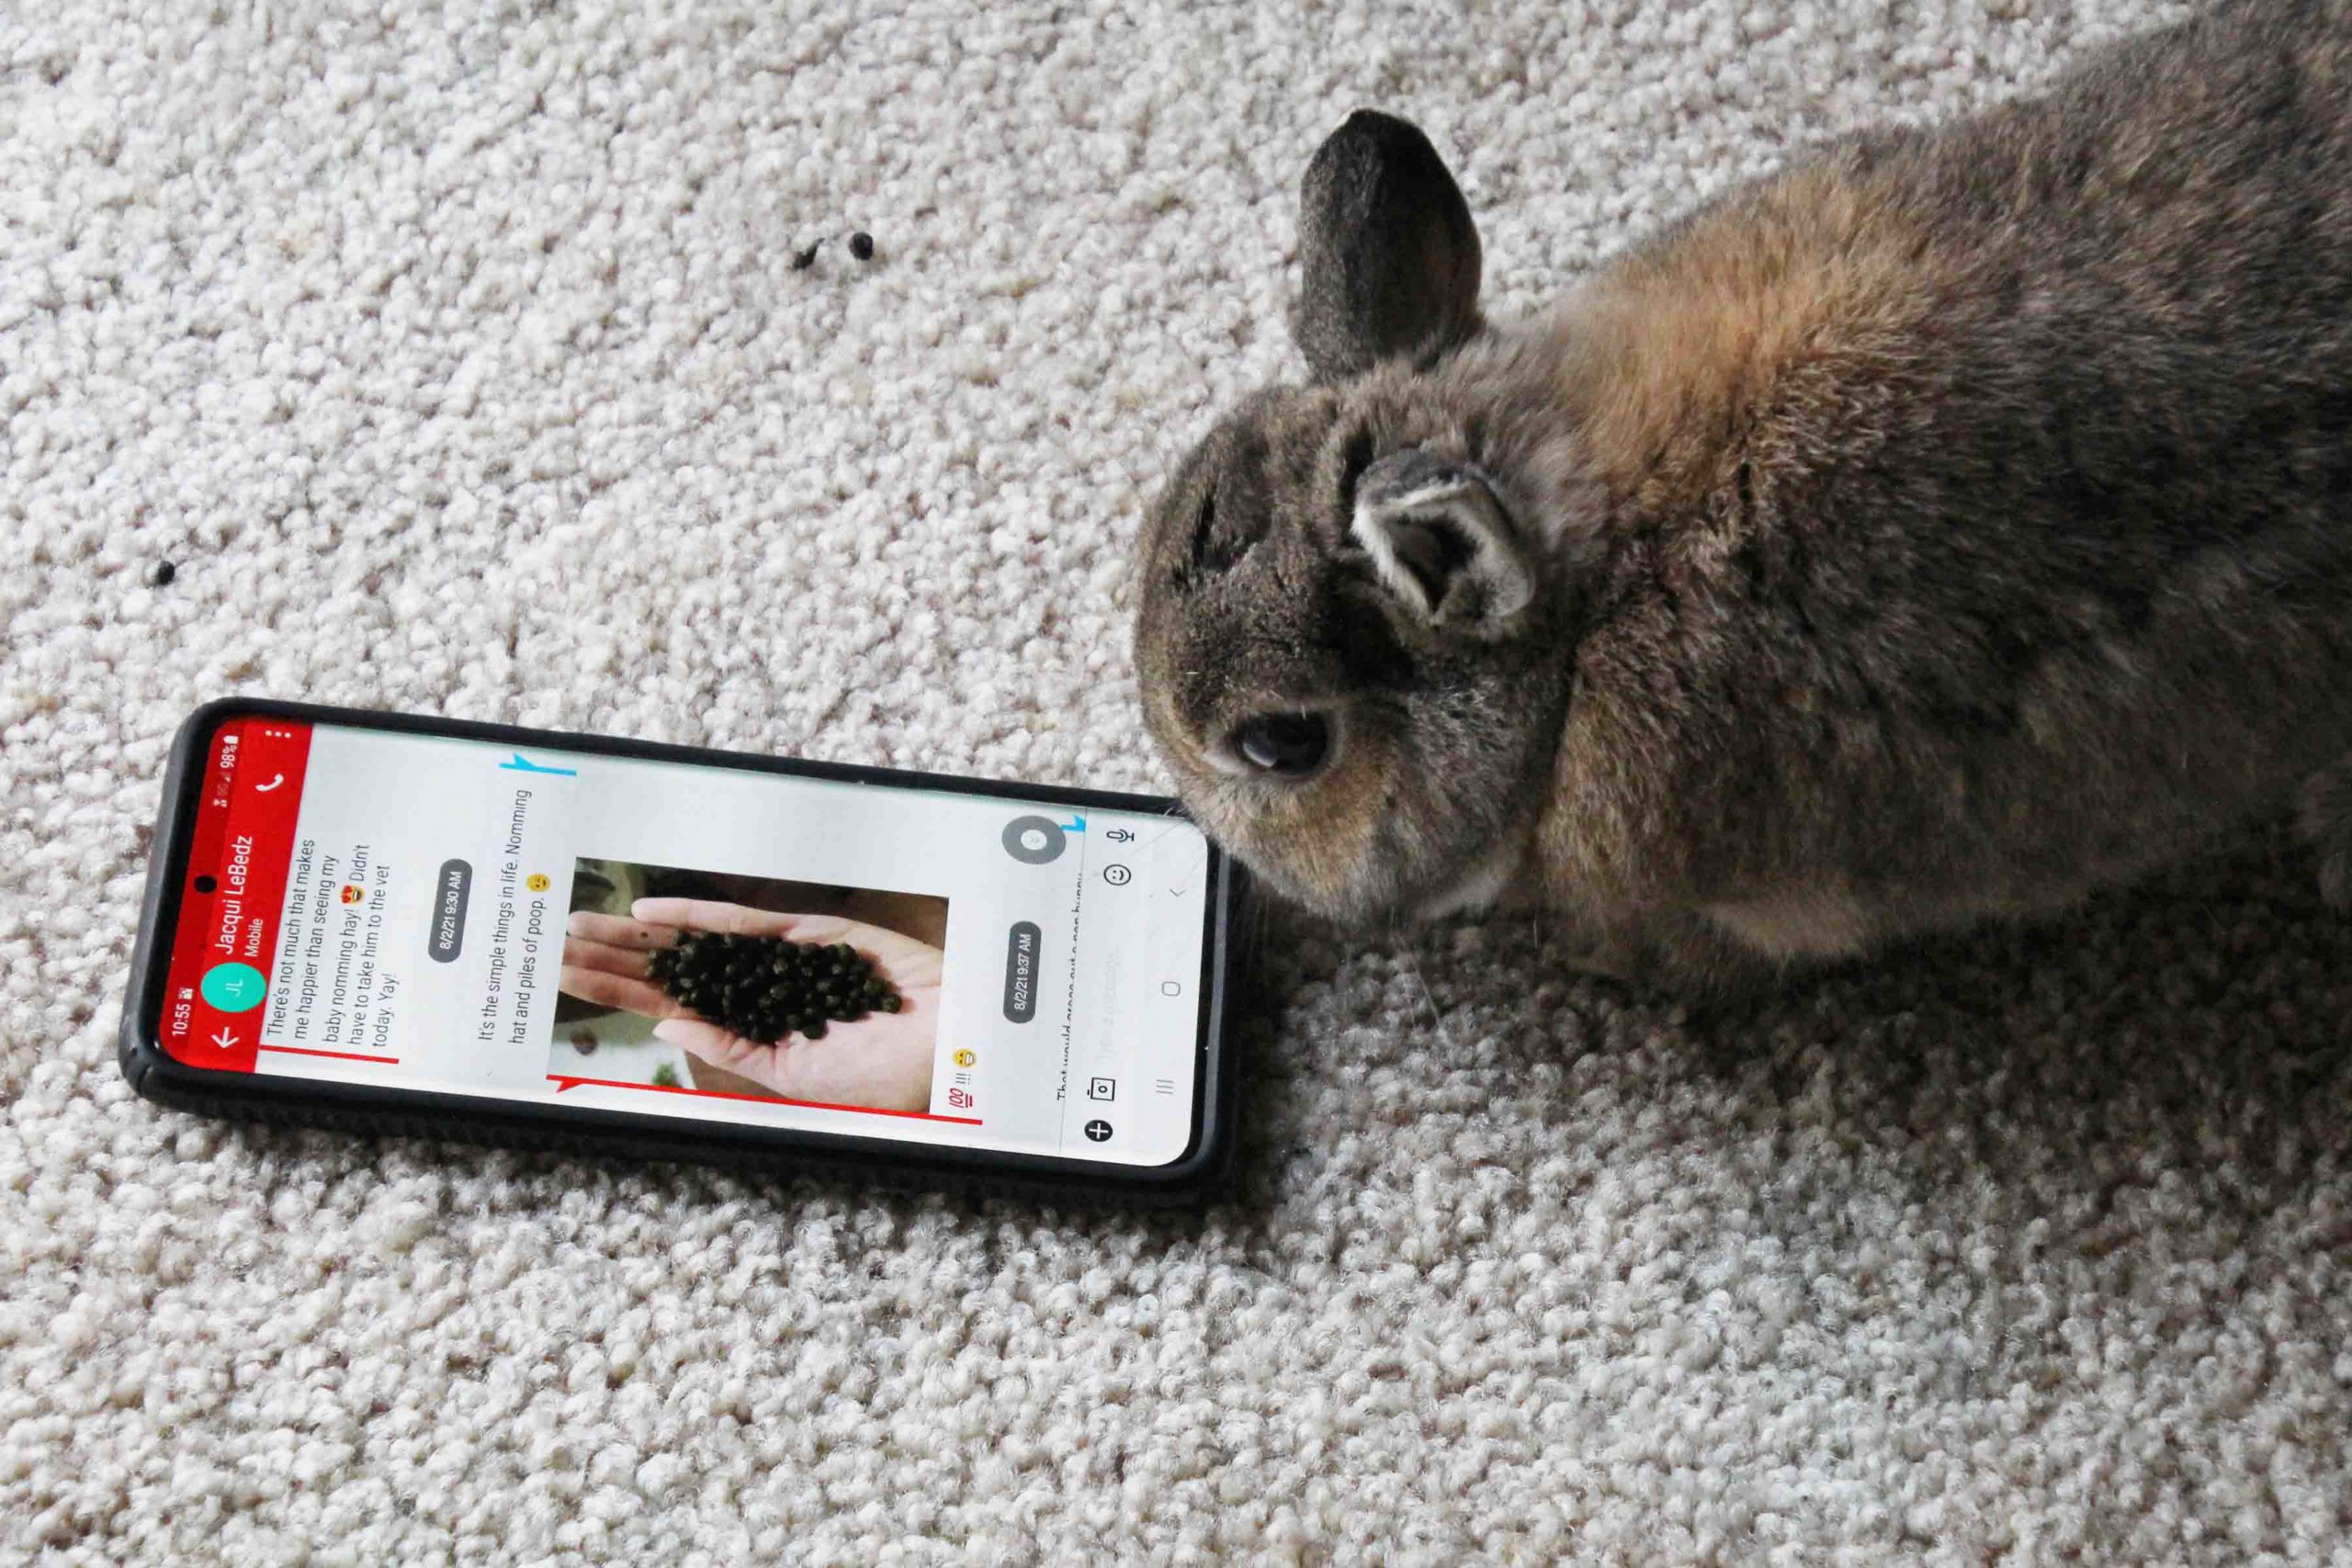 Abigail isn't sure what to think when she sees rabbit poop pictures on Dad's phone. 